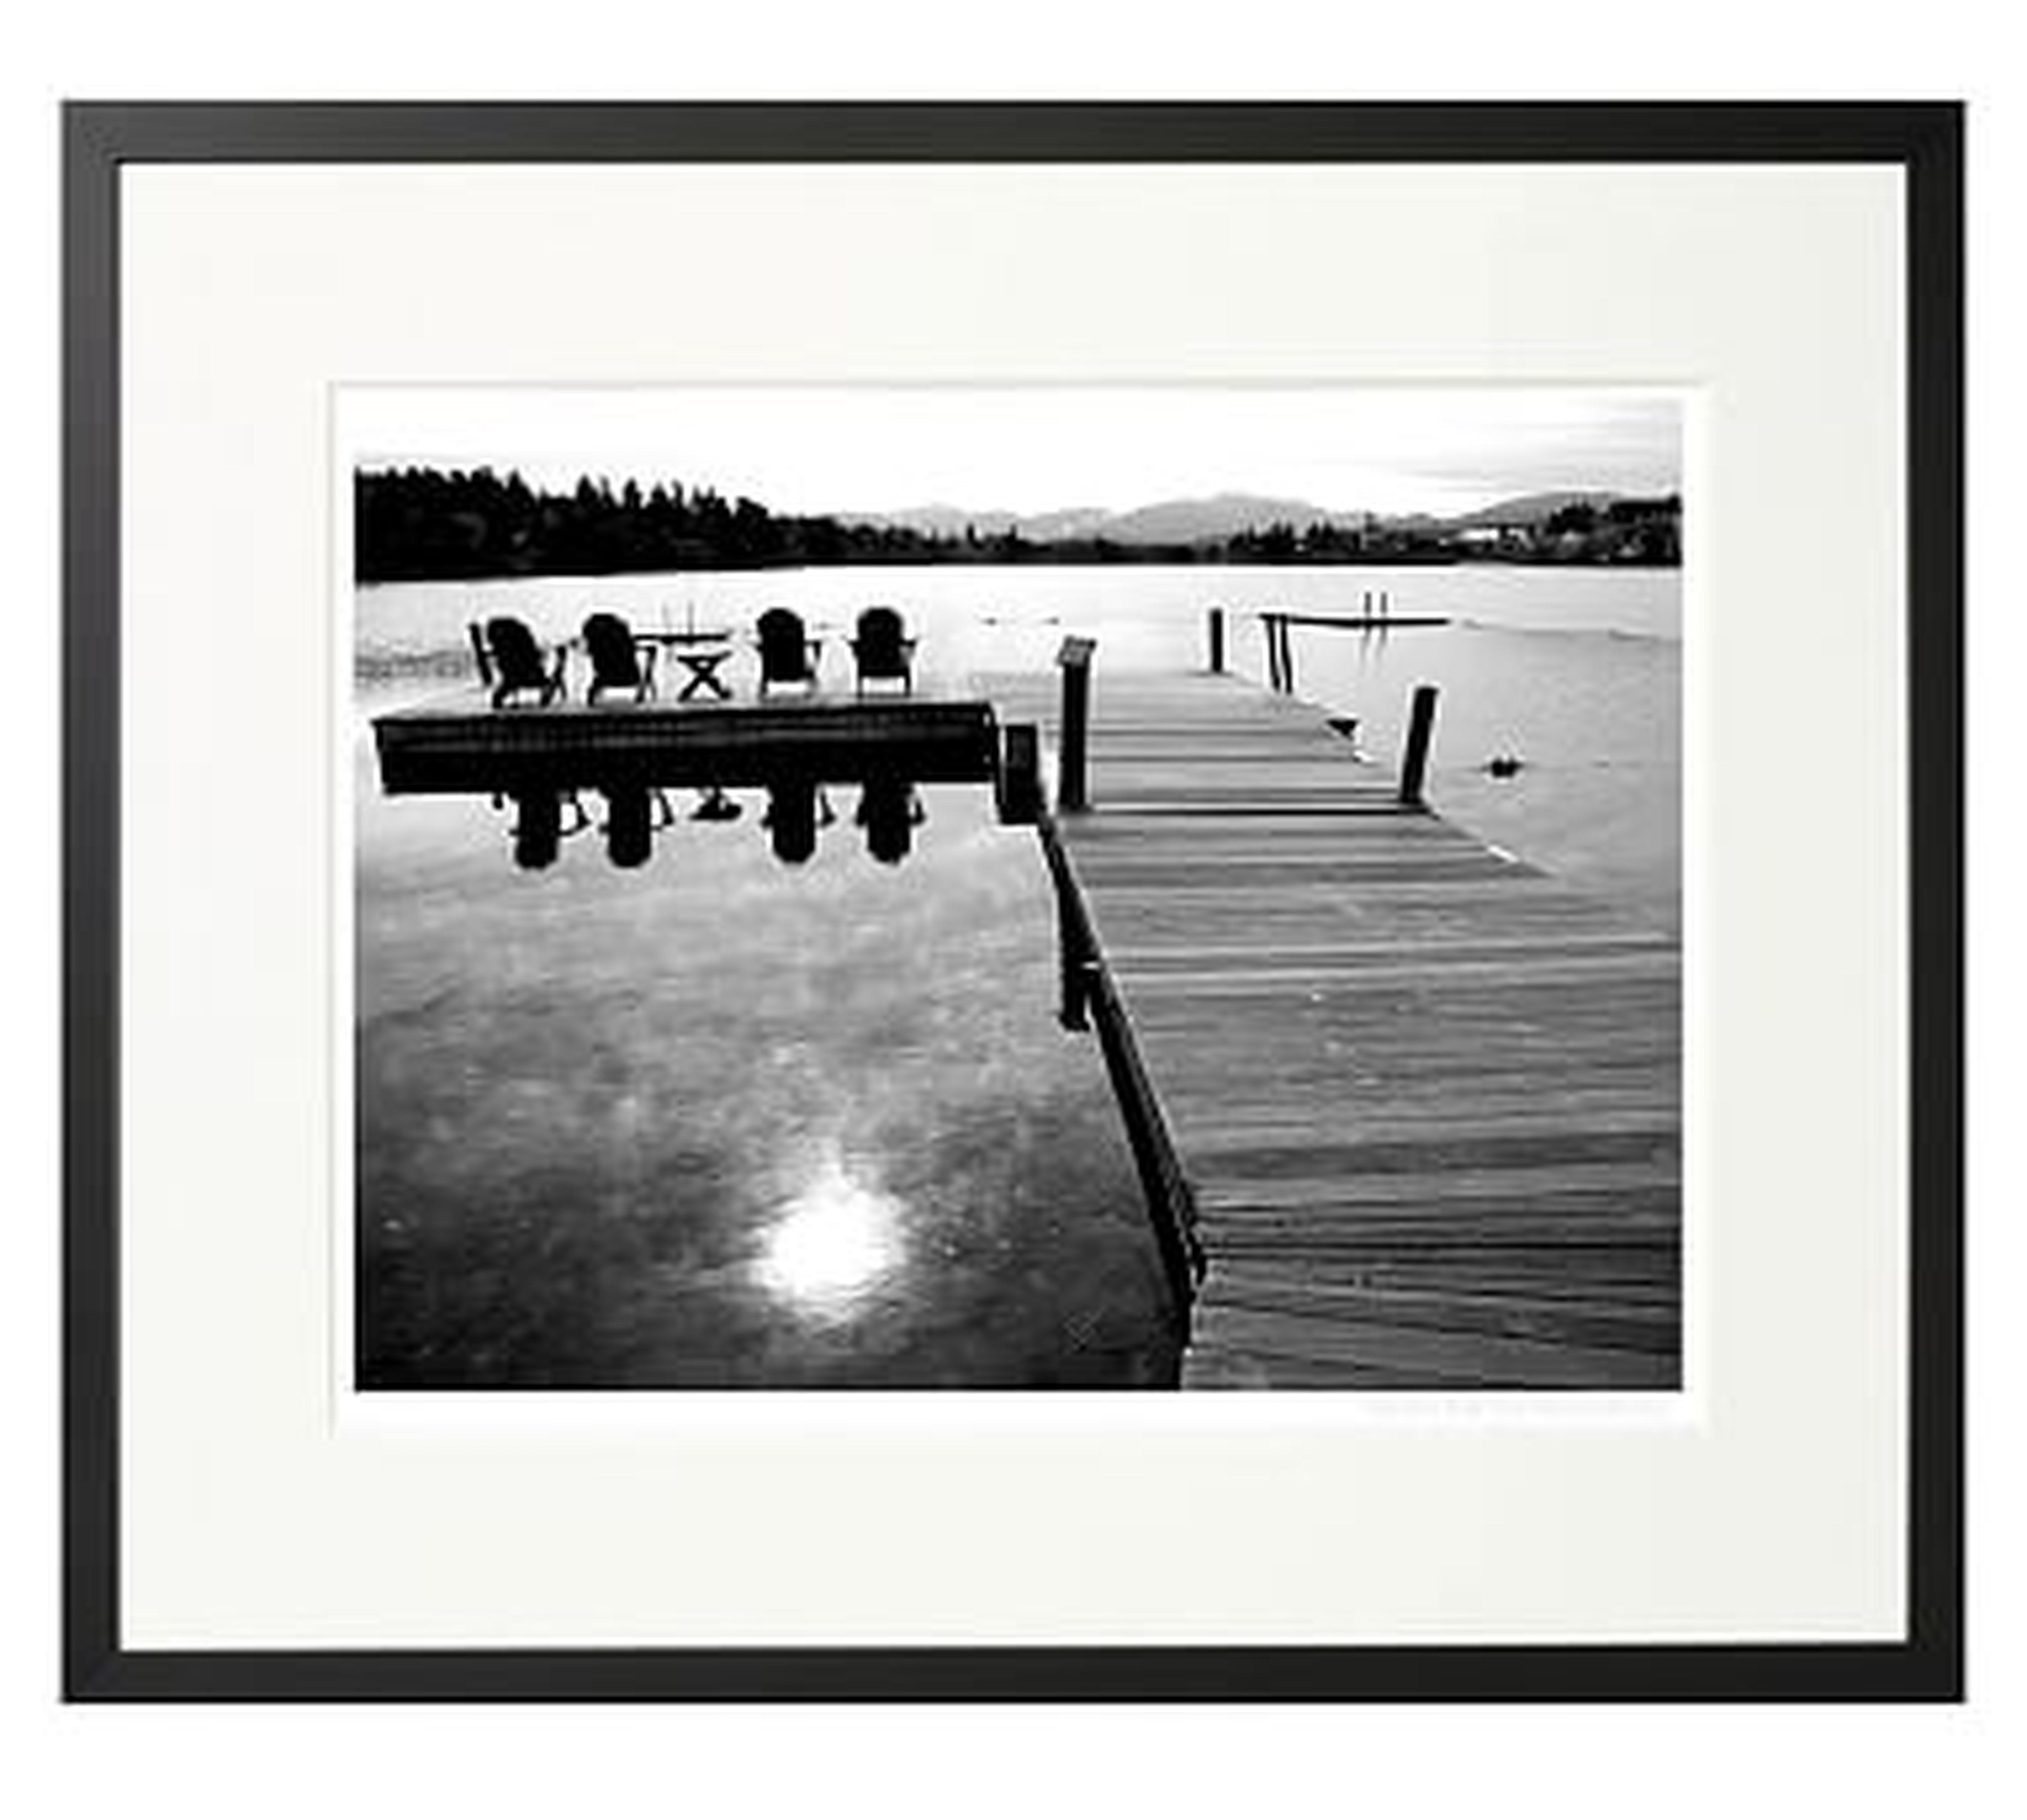 New York Times Archive Framed Photography, Mirror Lake - 2009, 24 x 20 ", Black - Pottery Barn